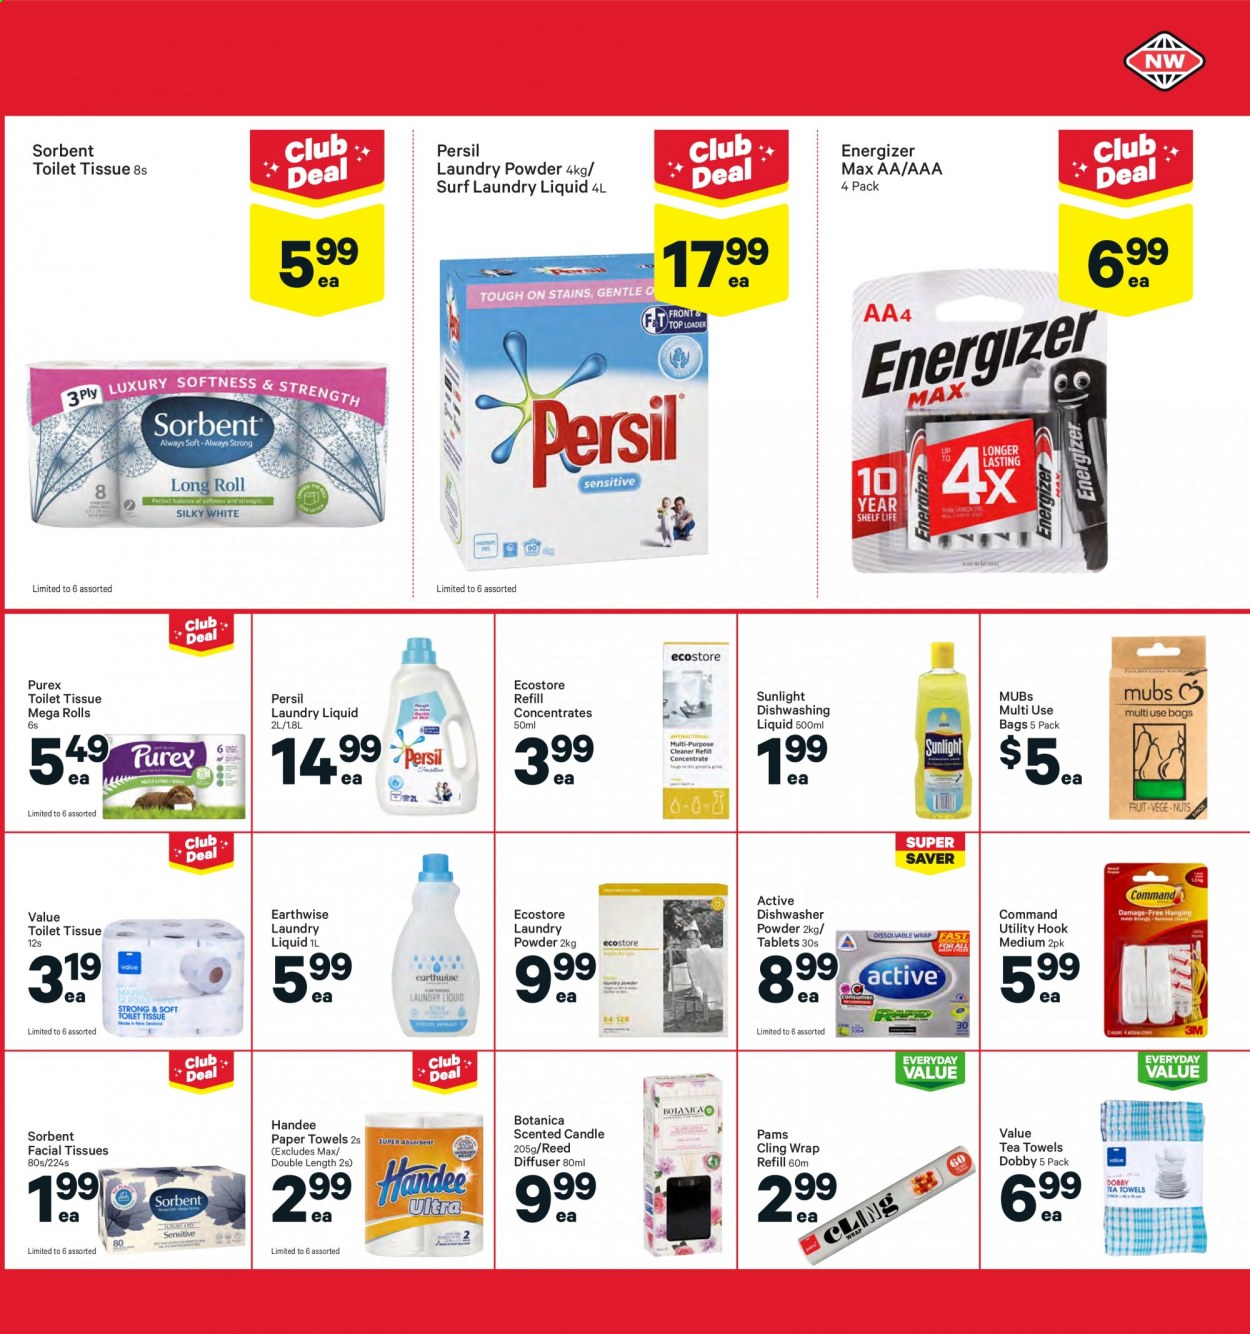 thumbnail - New World mailer - 16.08.2021 - 22.08.2021 - Sales products - tea, toilet paper, Handee, kitchen towels, paper towels, facial tissues, zinc. Page 29.